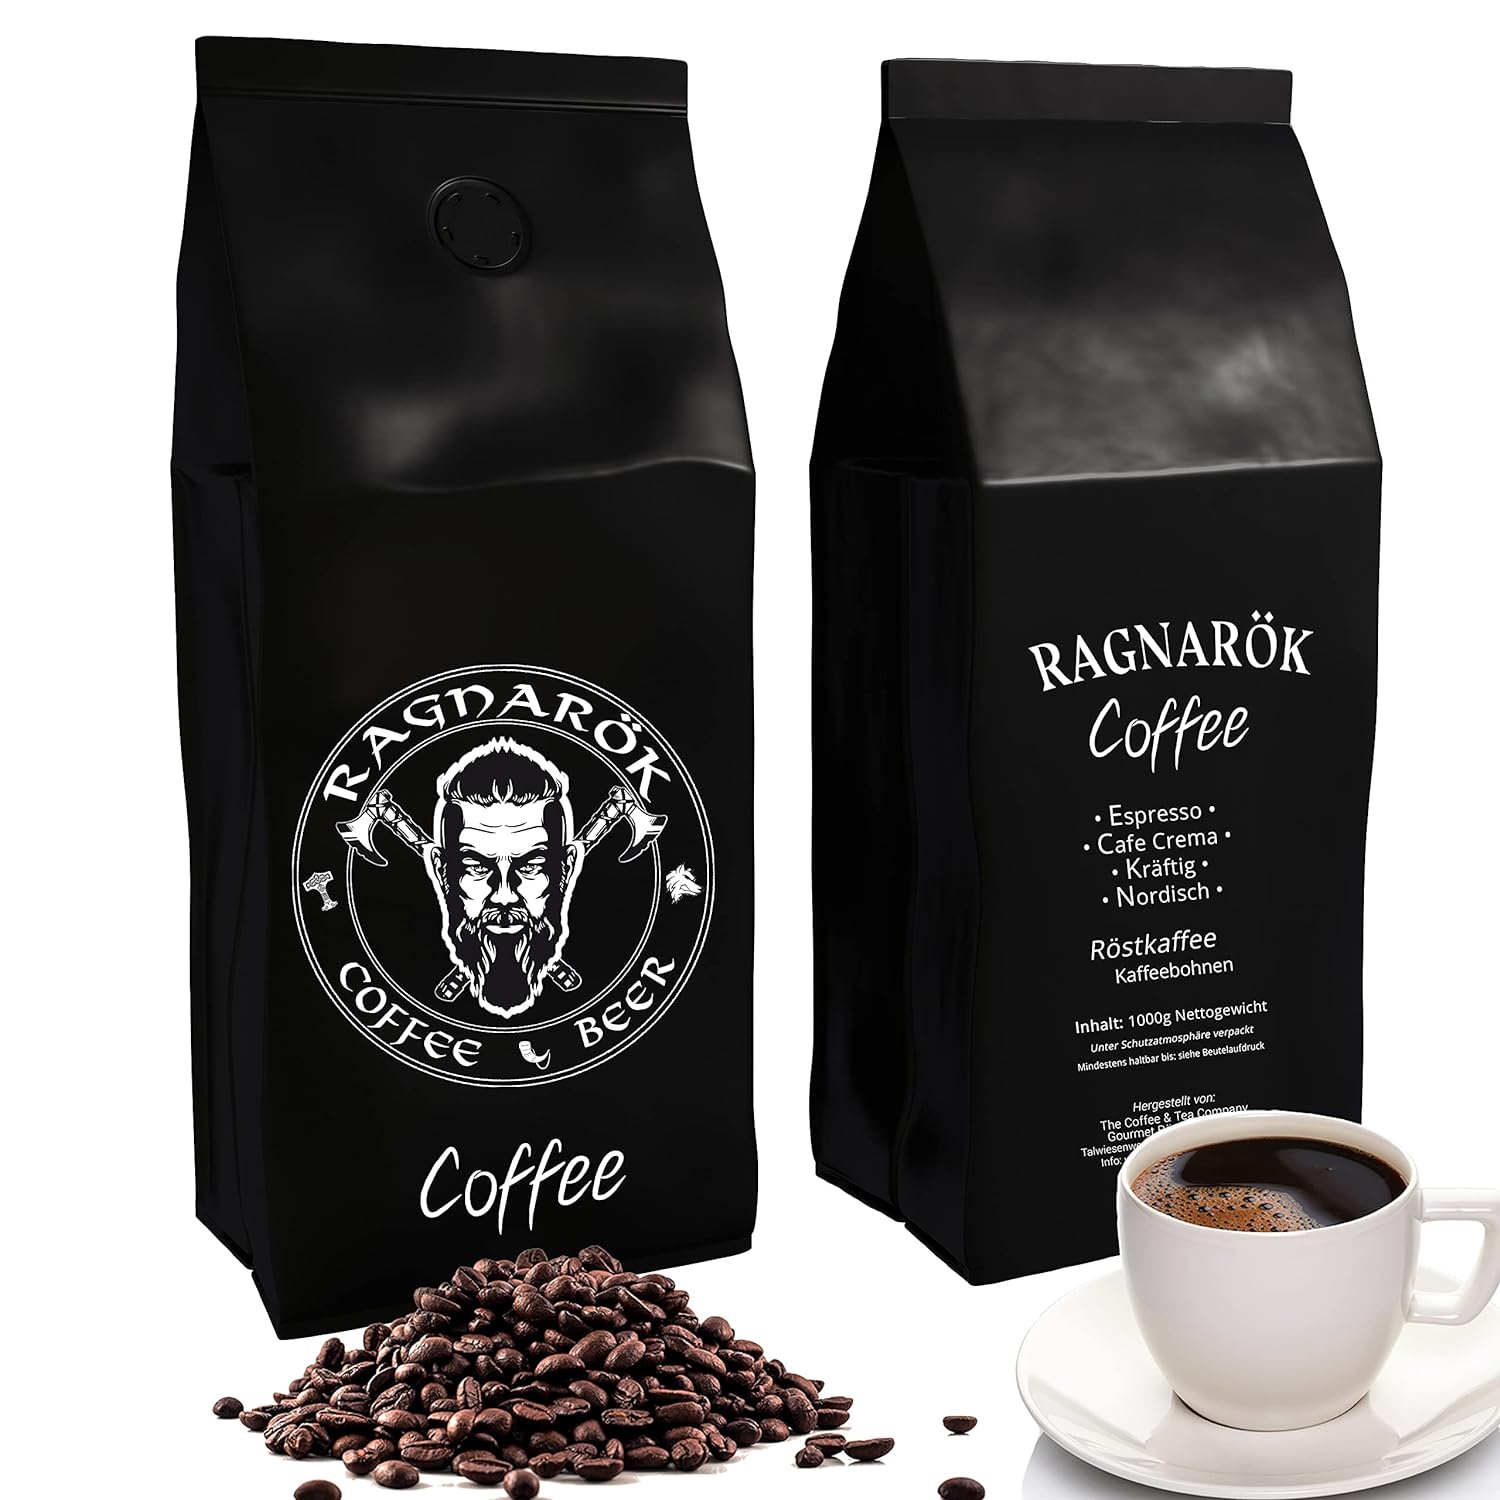 C&T "Ragnarök Coffee" Nordic Roasted Coffee | 1000g whole bean | drinkable as Espresso & Cafe Crema | strong + spicy + aromatic | 100% natural with caffeine
